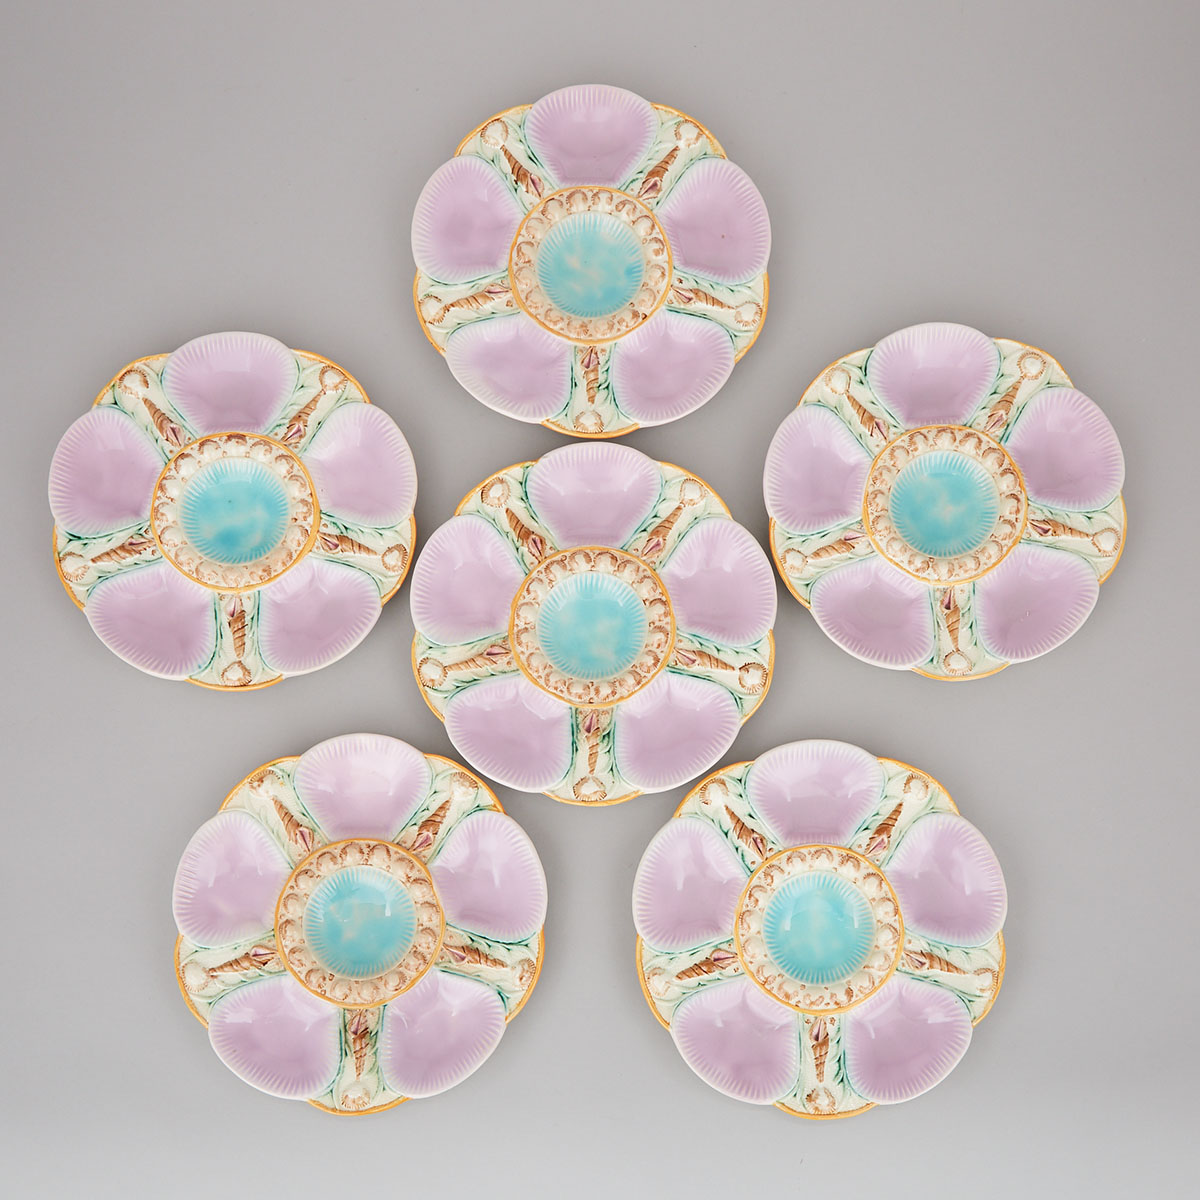 Six Minton-Style Majolica Oyster Plates, c.1880